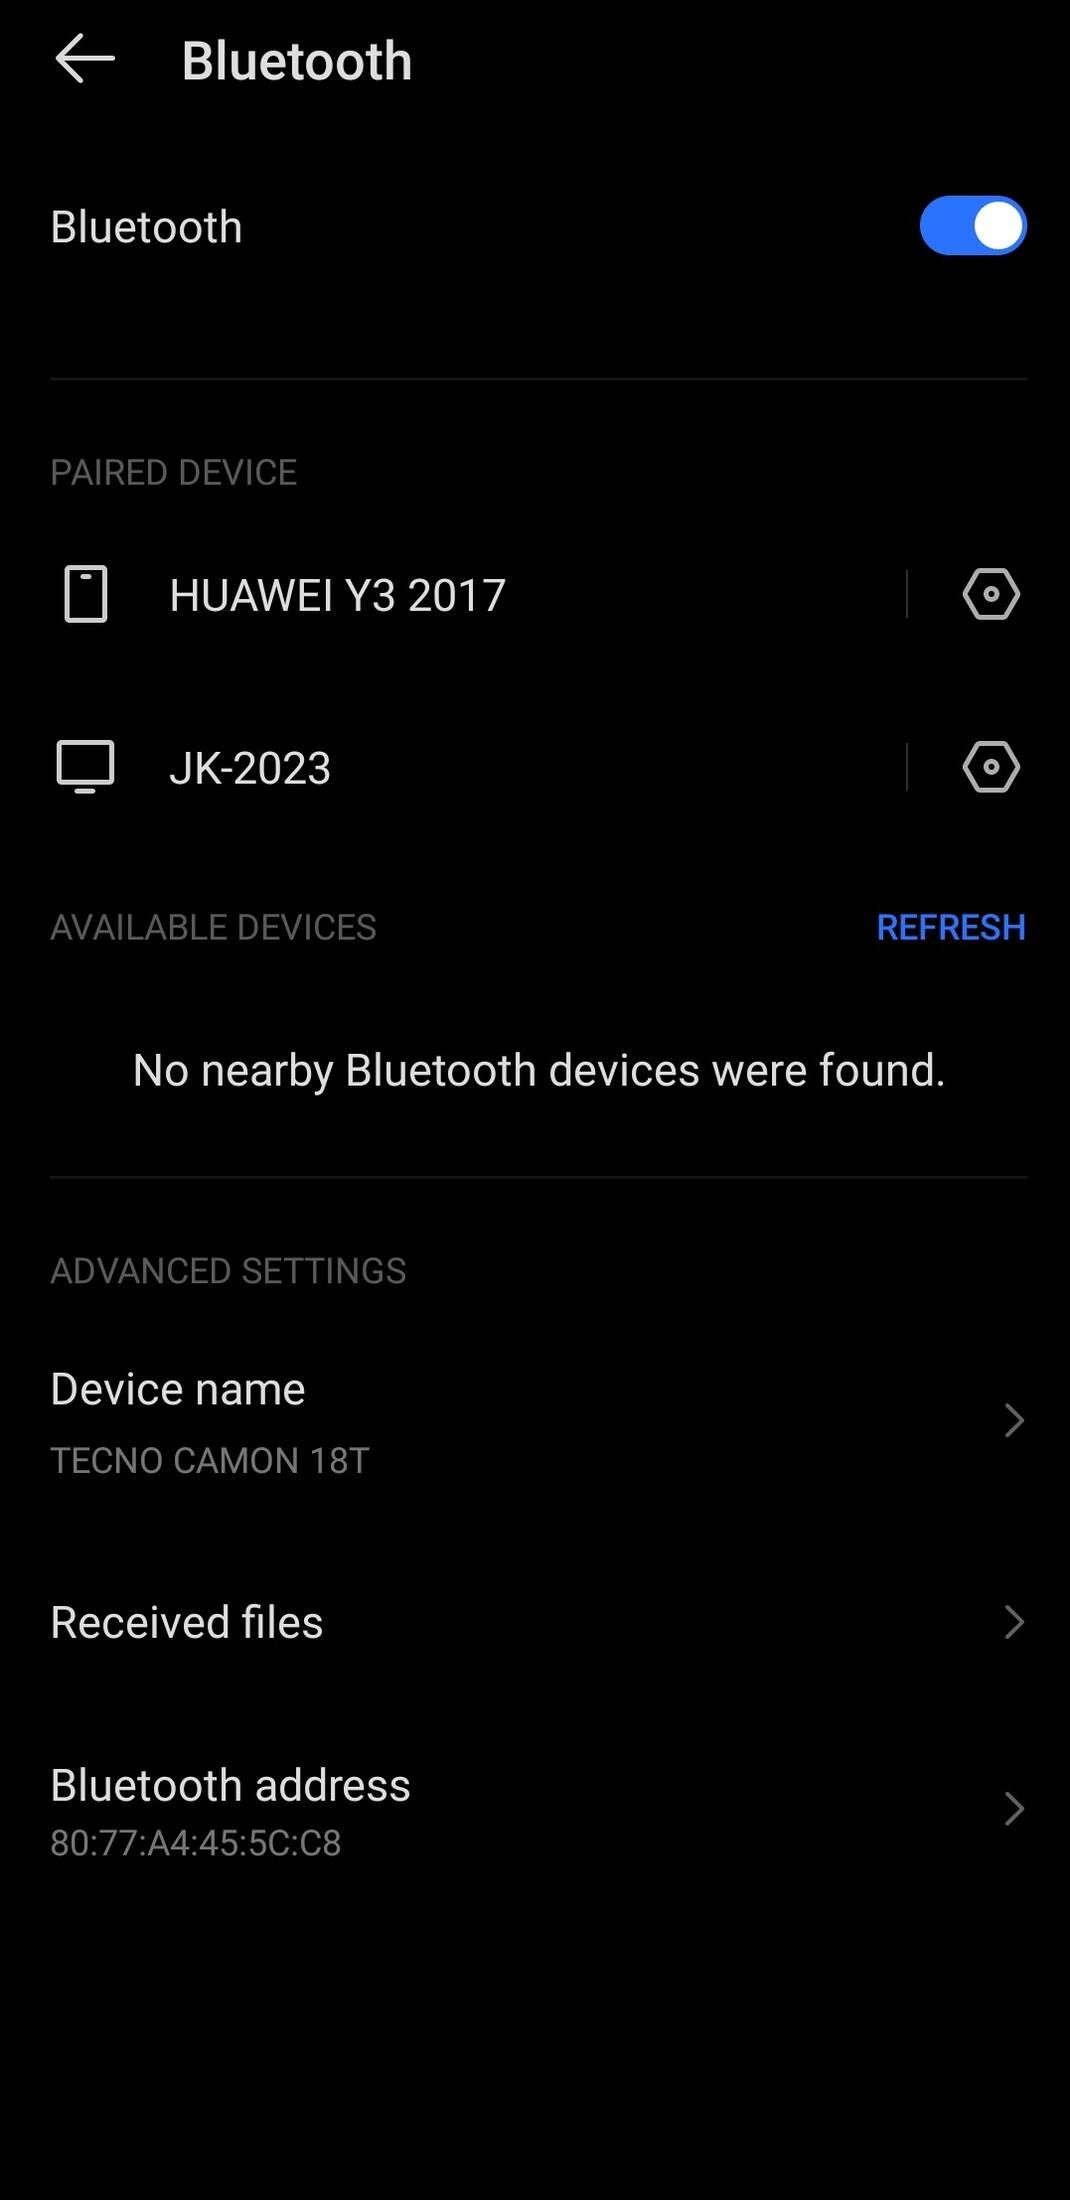 Bluetooth settings showing paired devices